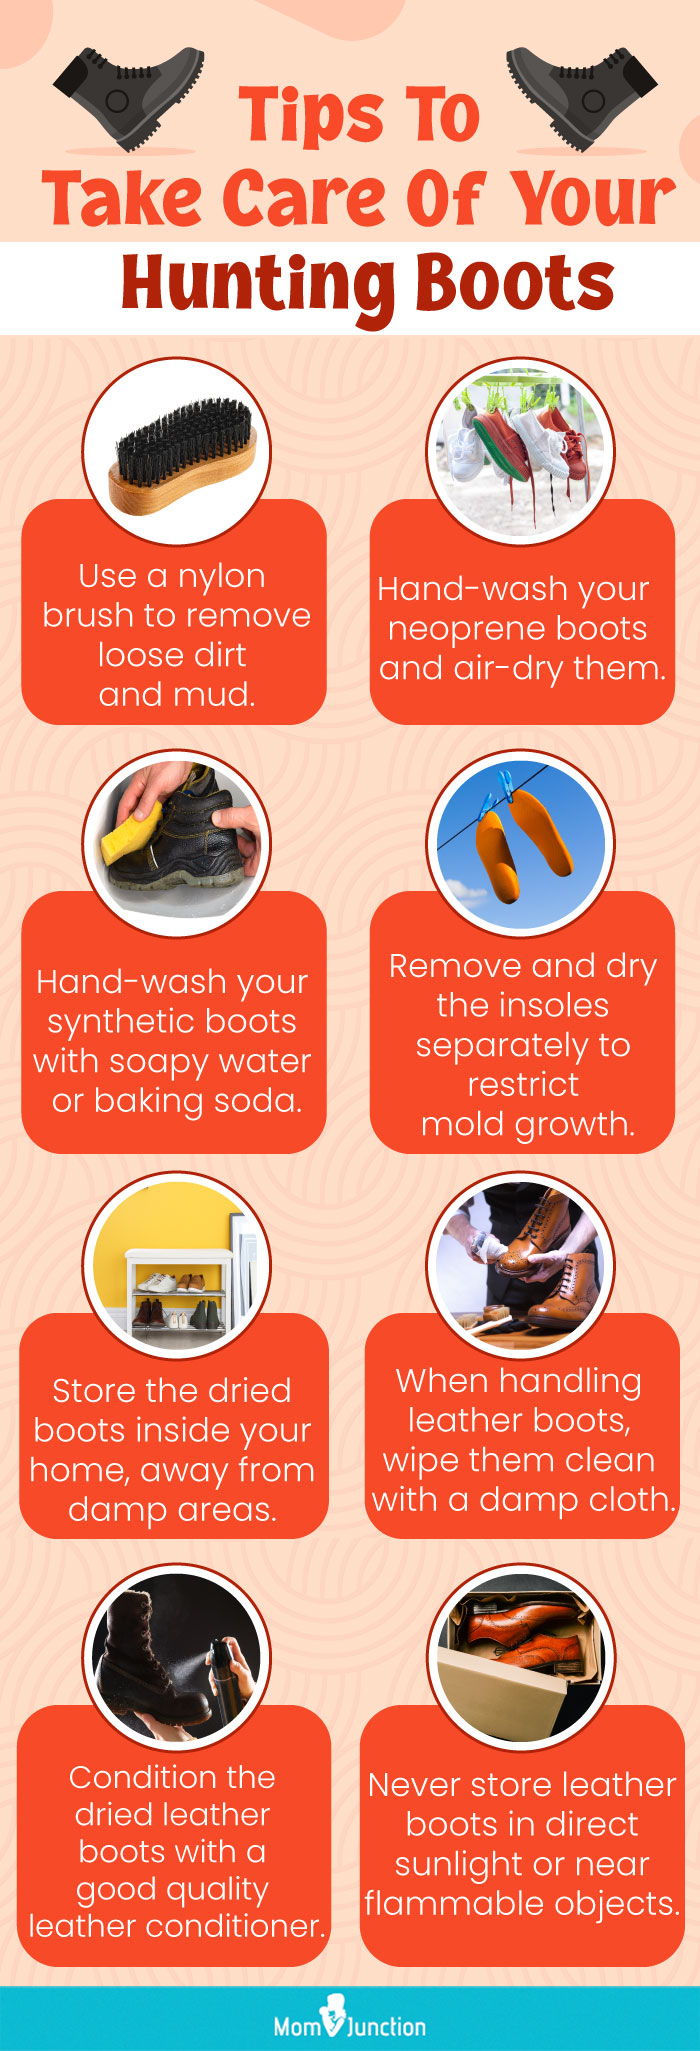 Tips To Take Care Of Your Hunting Boots (infographic)